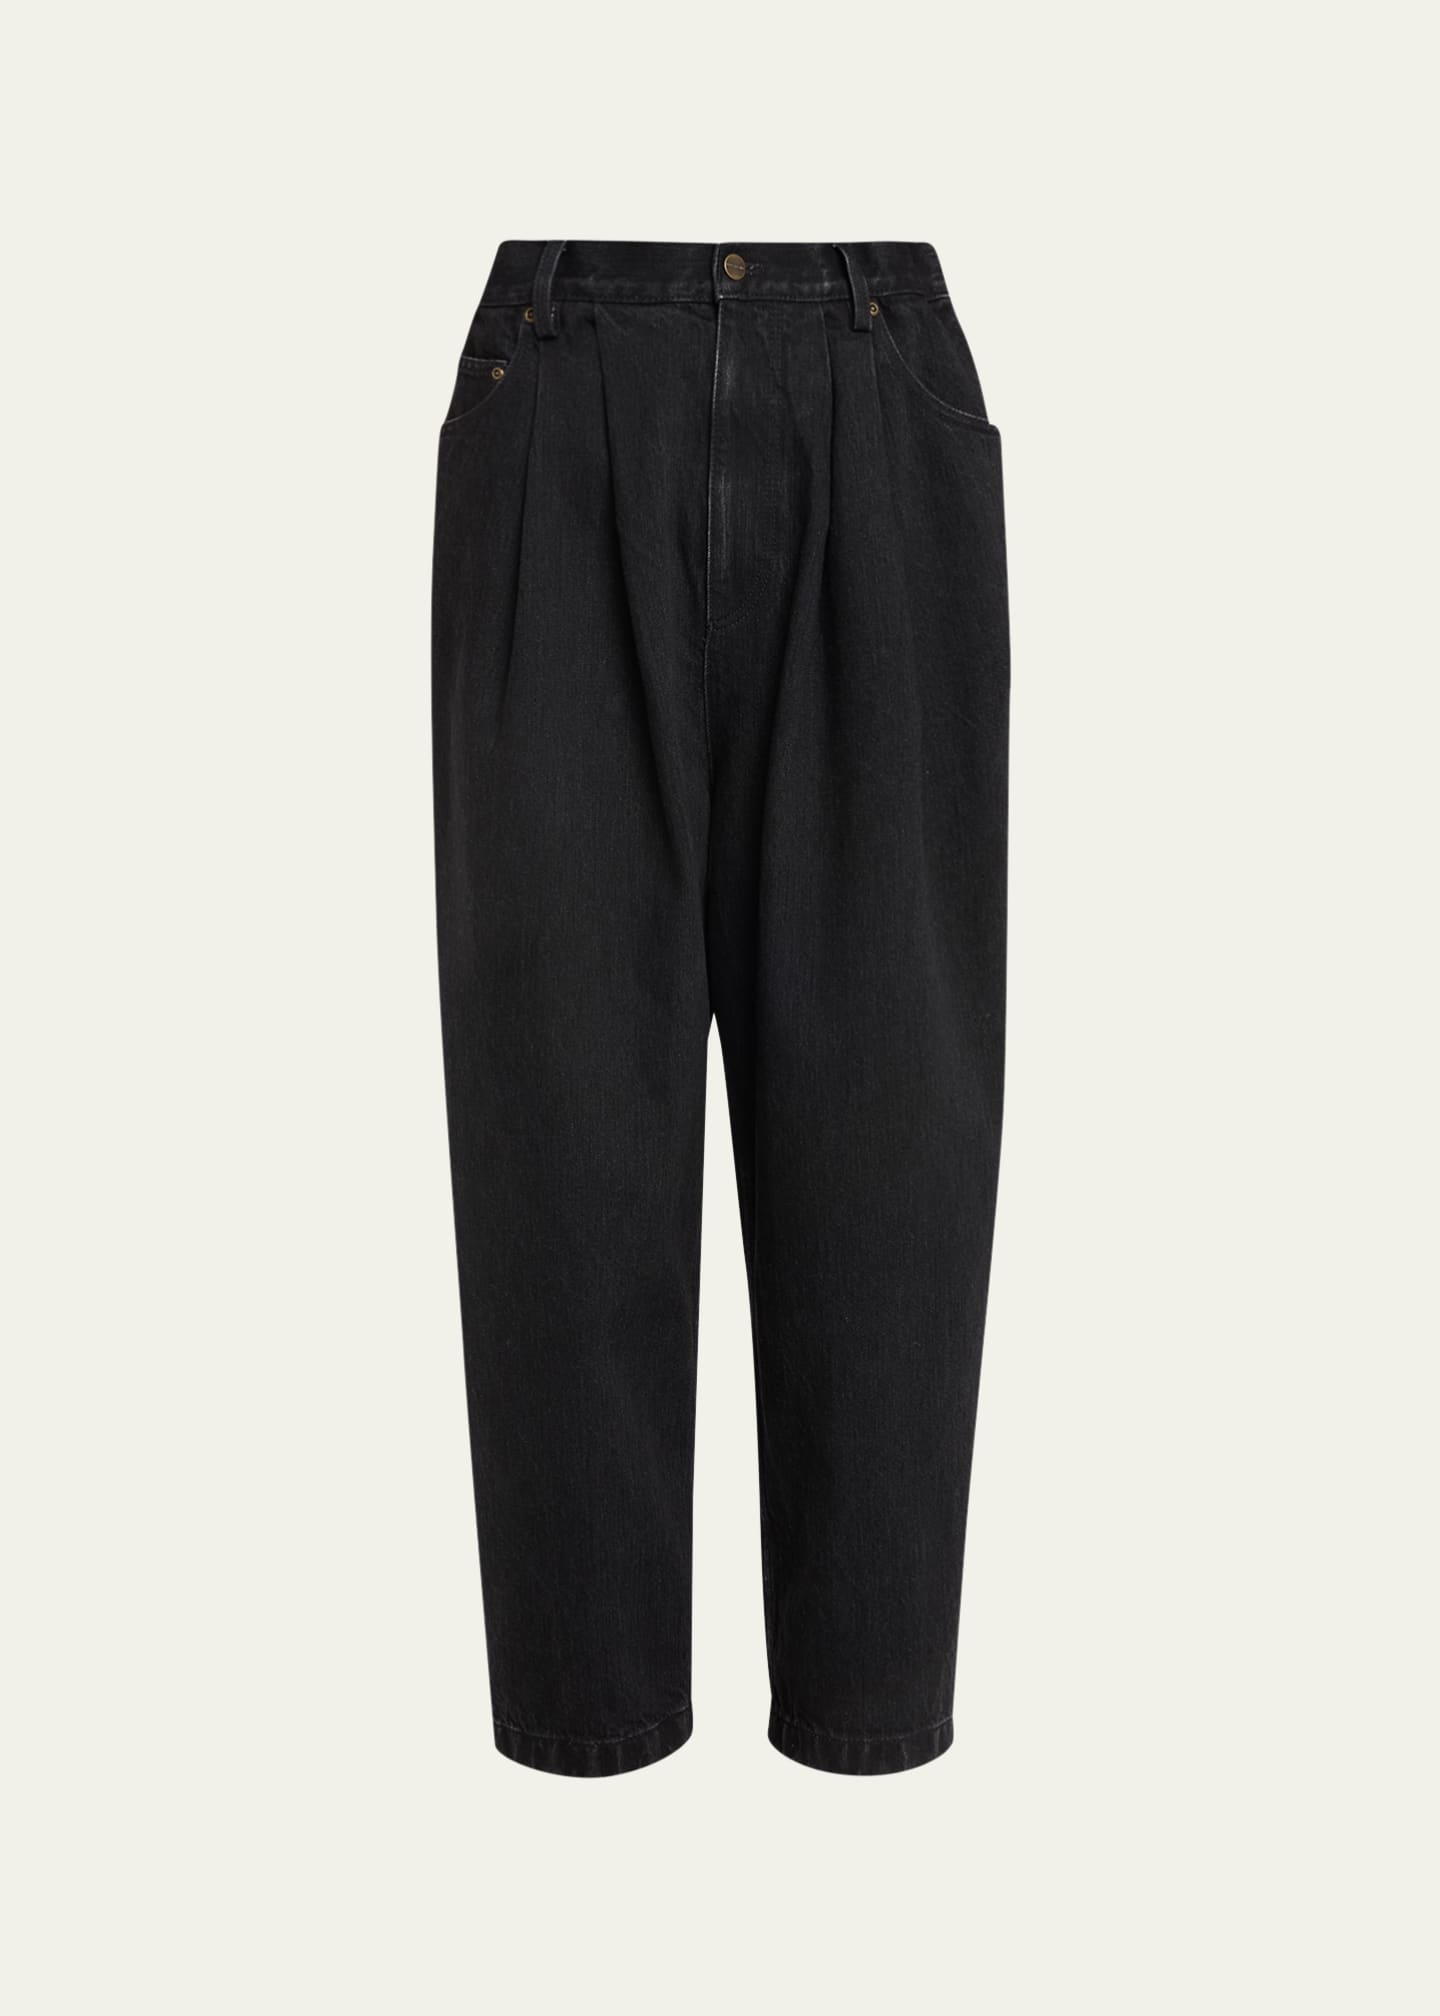 Marc Jacobs Runway Oversized Front Pleated Jeans - Bergdorf Goodman